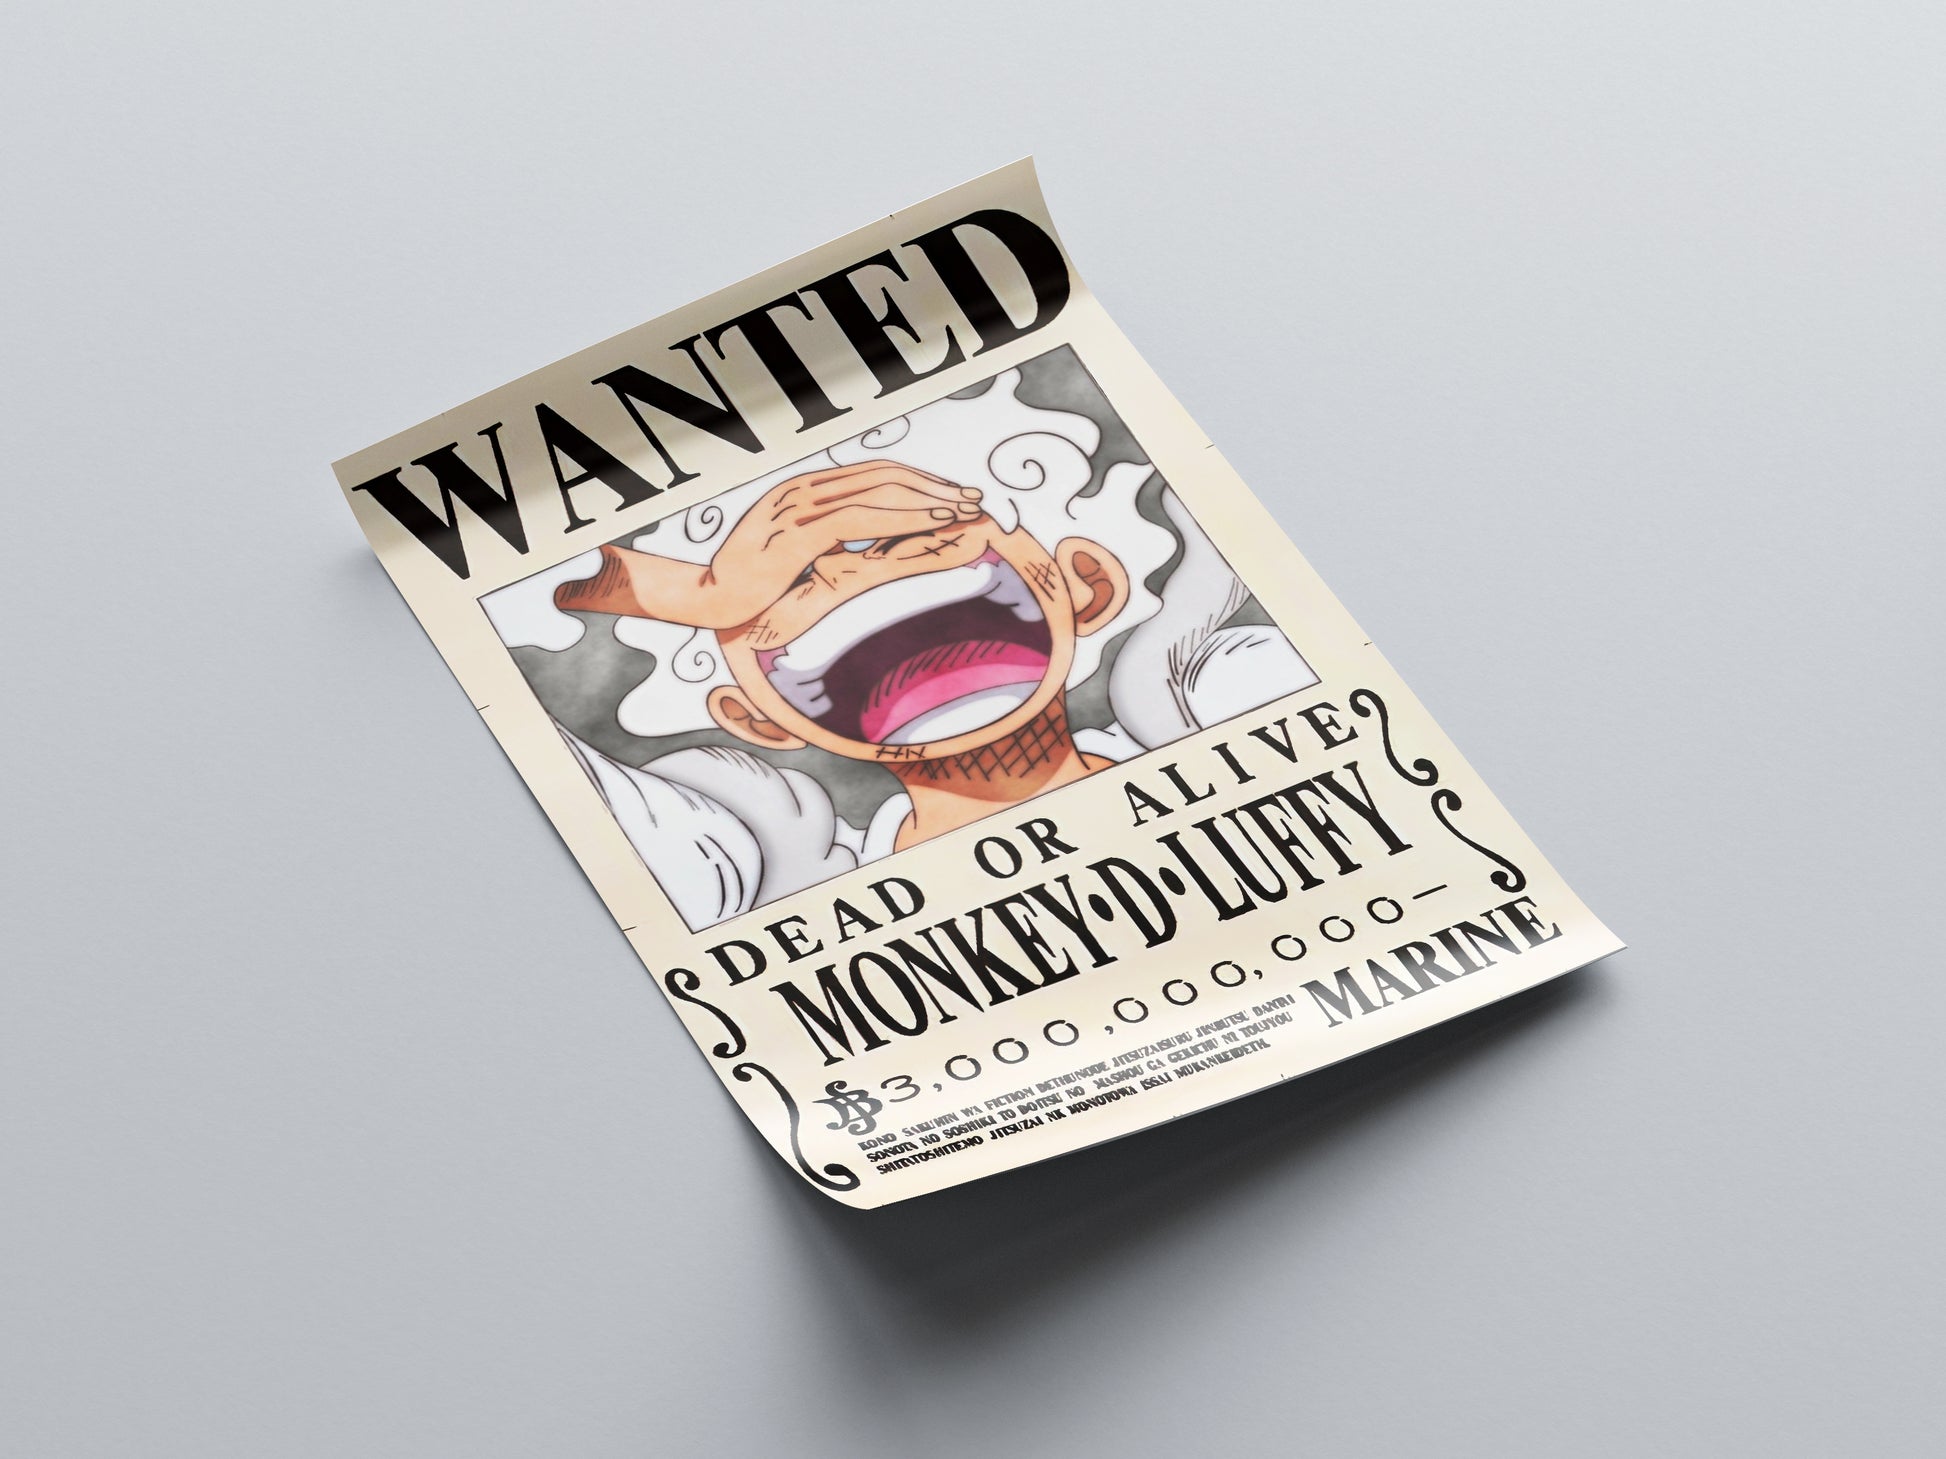 Monkey D Luffy Post Wano Bounty Poster - One Piece - Weebshop